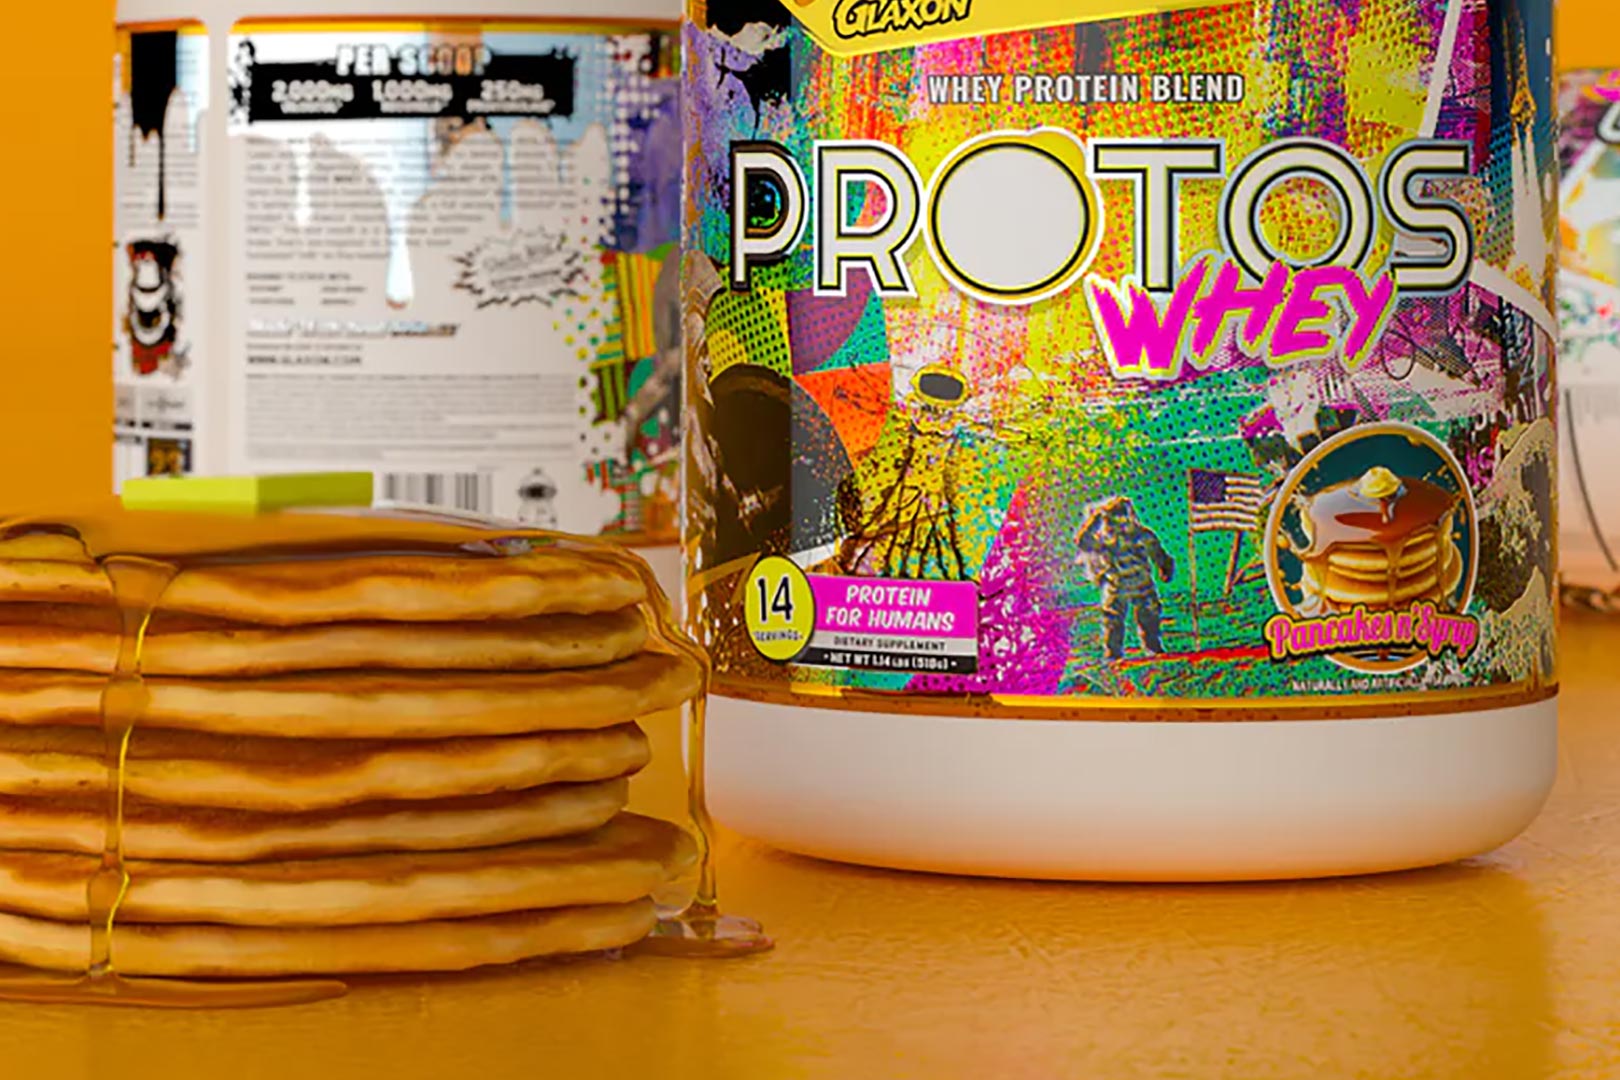 Glaxon Pancakes And Syrup Protos Whey